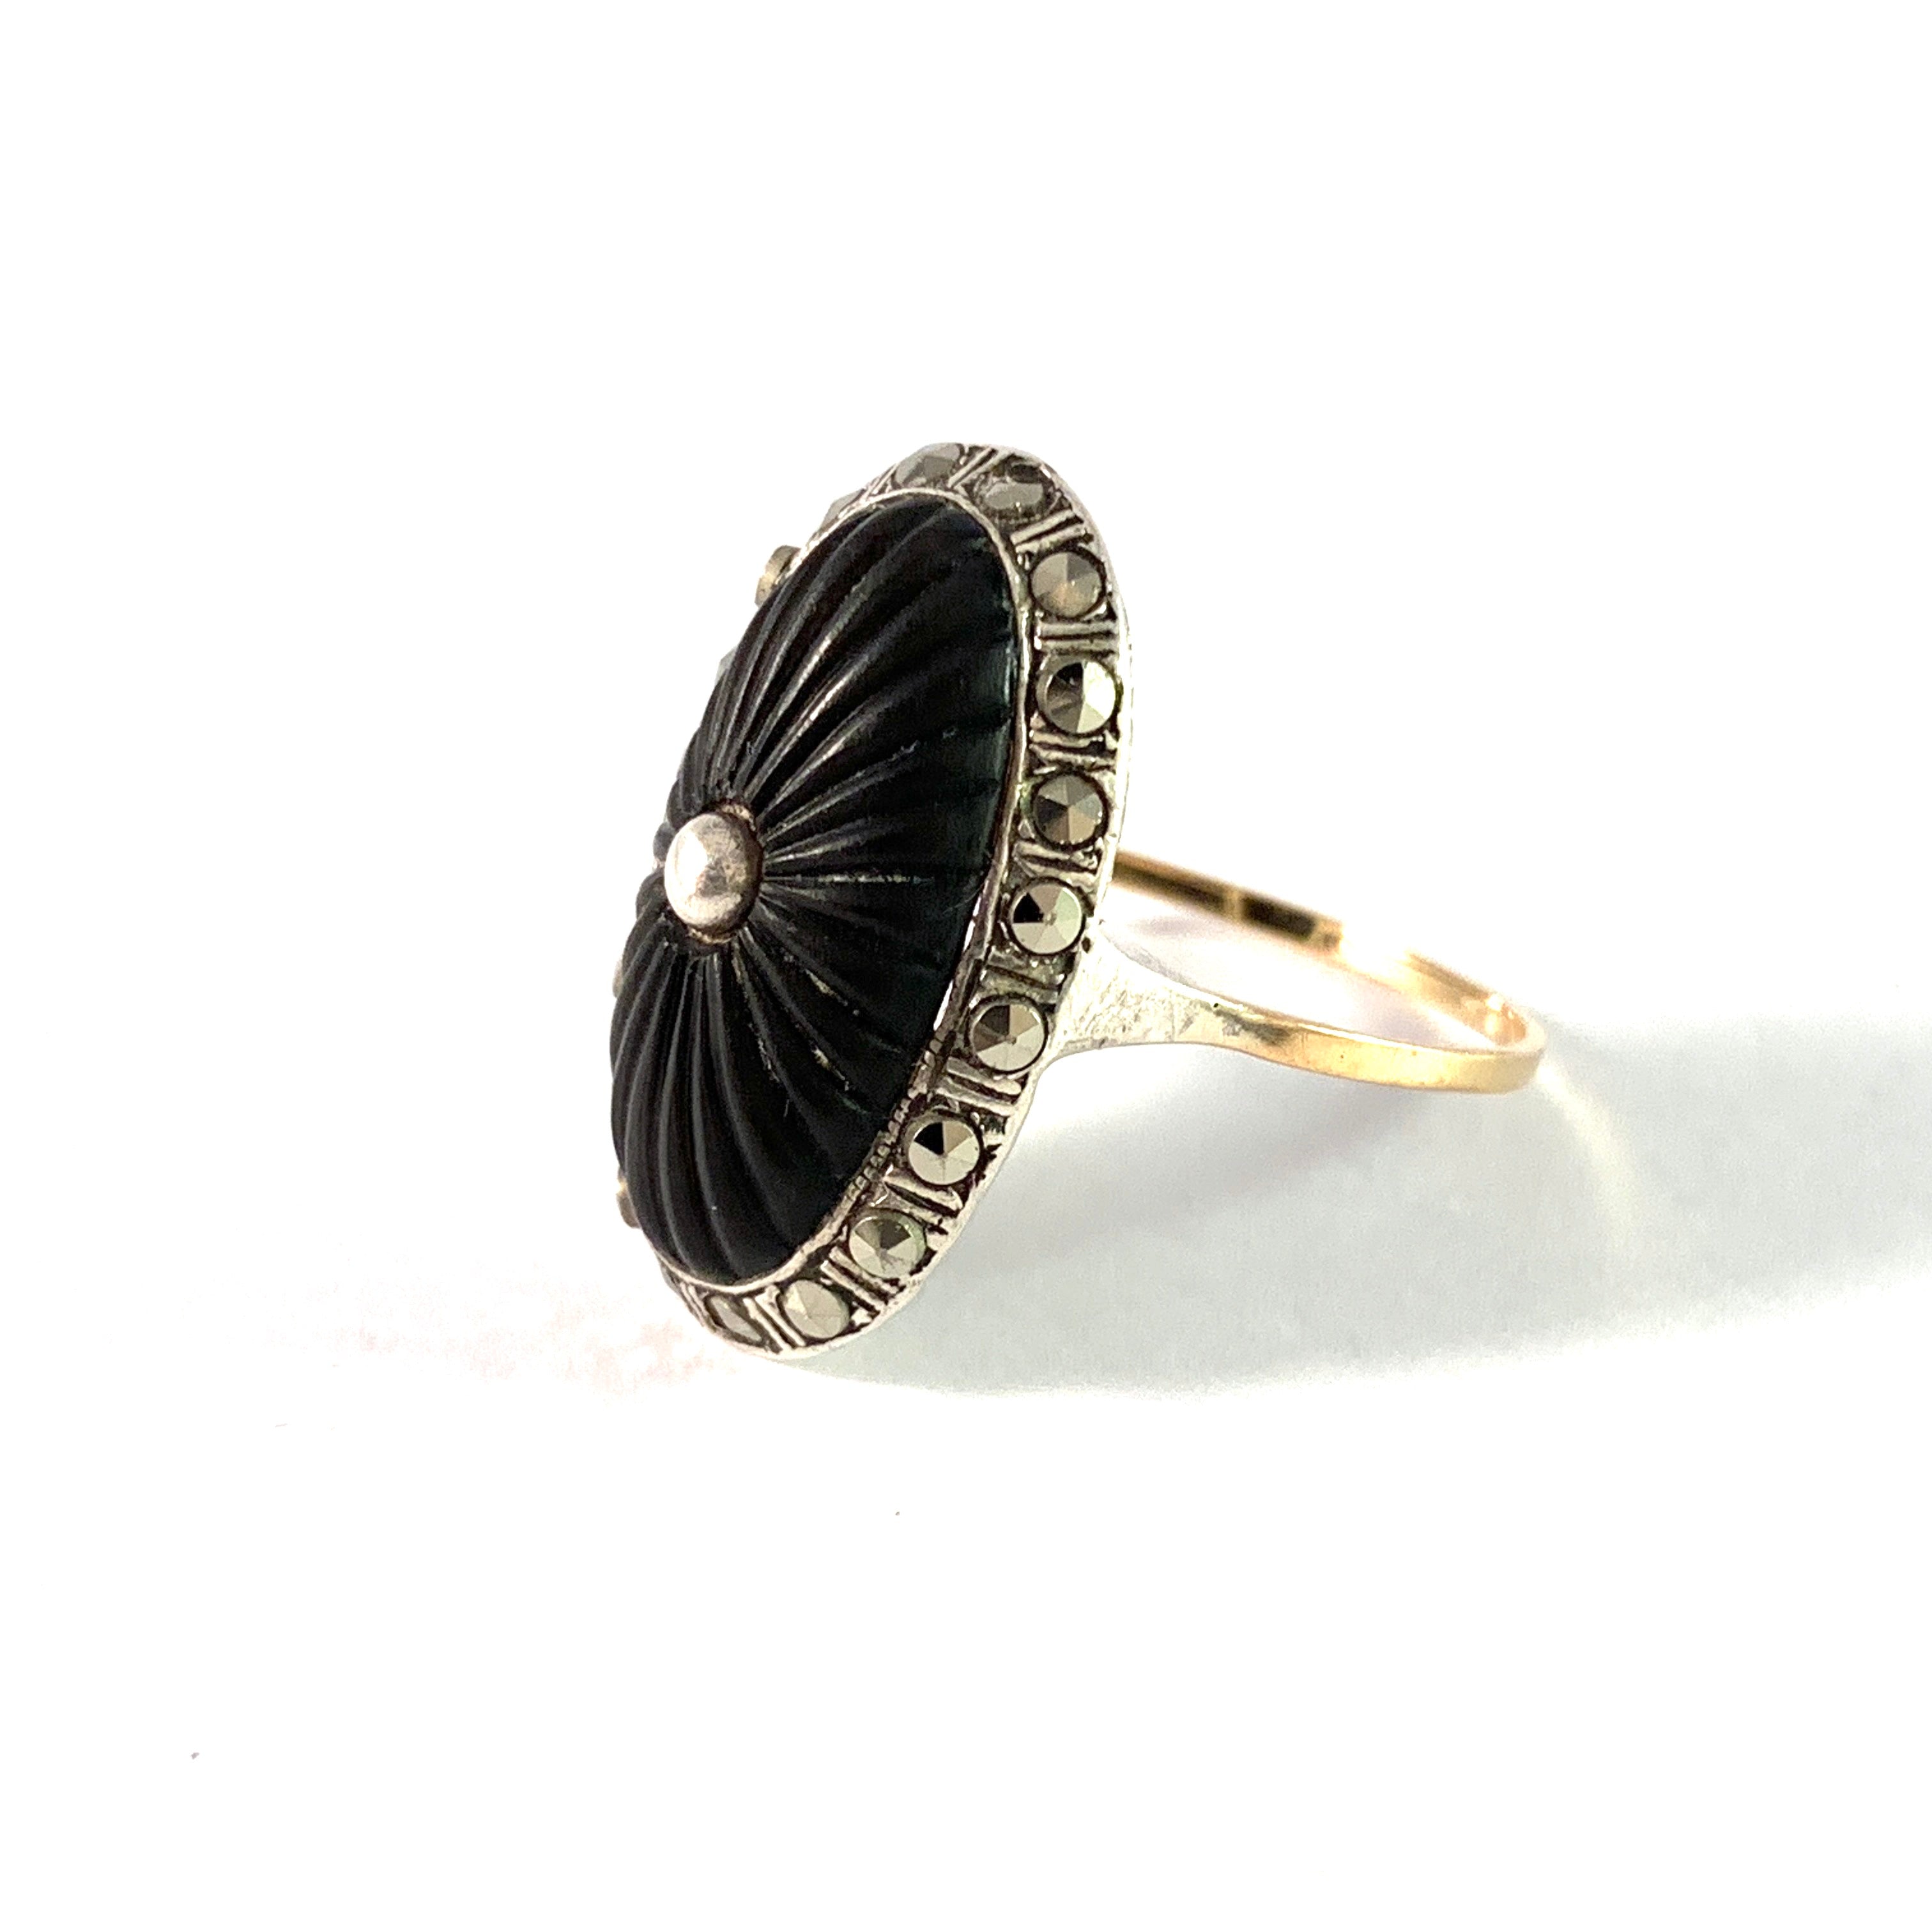 Sweden. Antique Early 1900s 18k Gold Silver Jet Marcasite Mourning Ring.